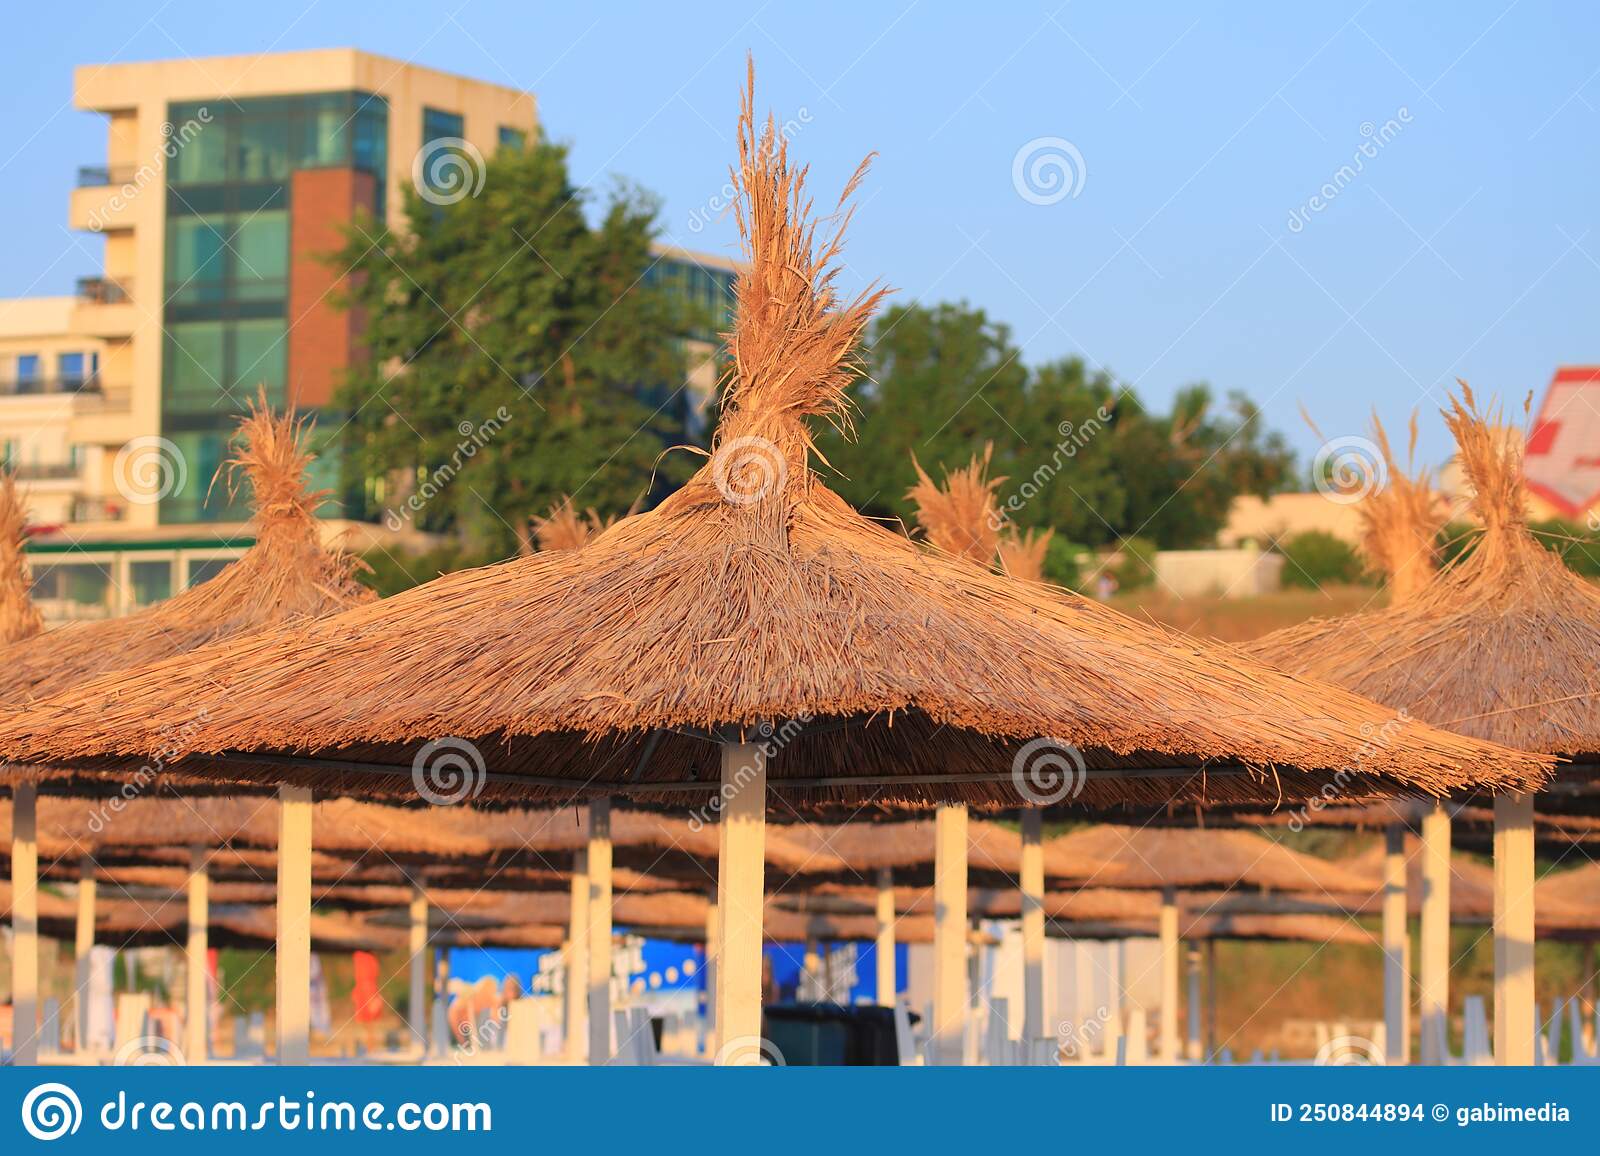 Thatched roof sunbed at sea